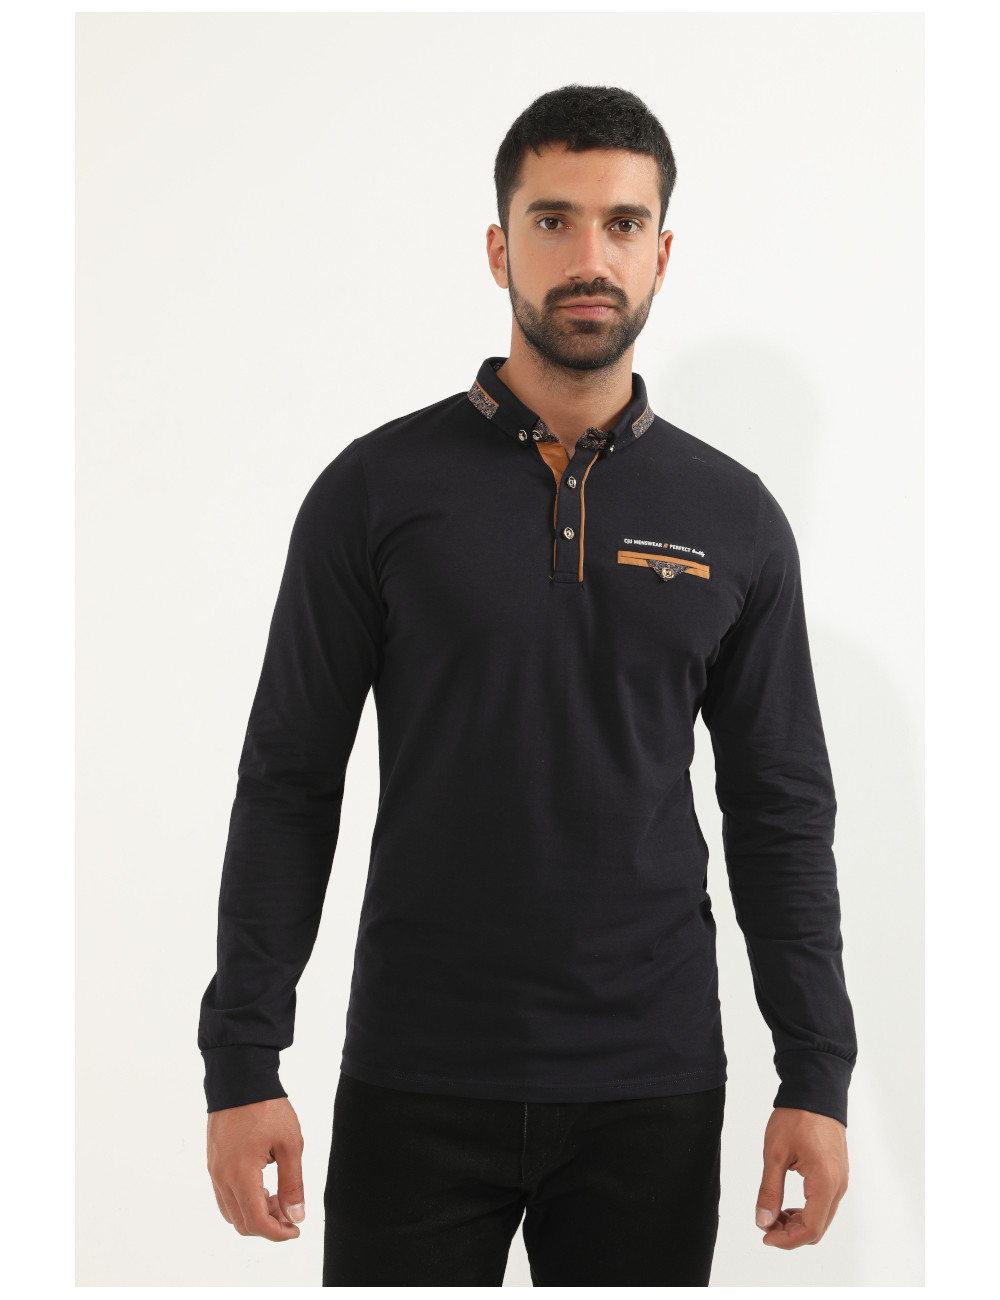 POLO MANCHES LONGUES HOMME MARRON Taille XL